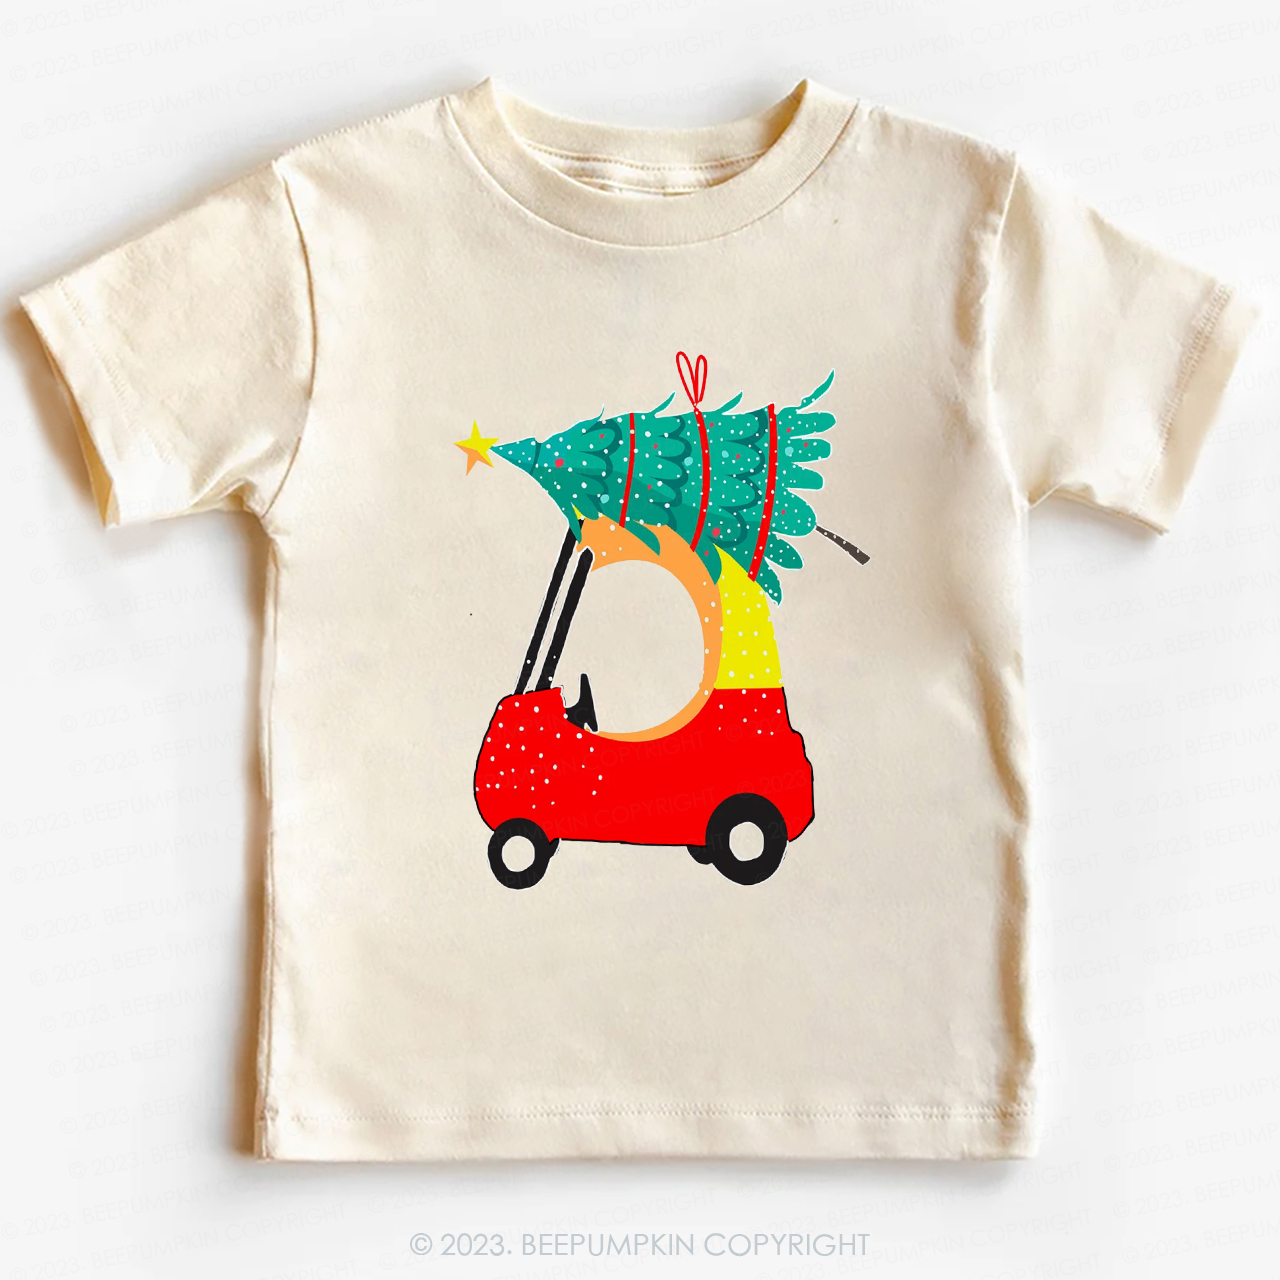 Q-version Convertible Carrying a Christmas Tree-Toddler Tees